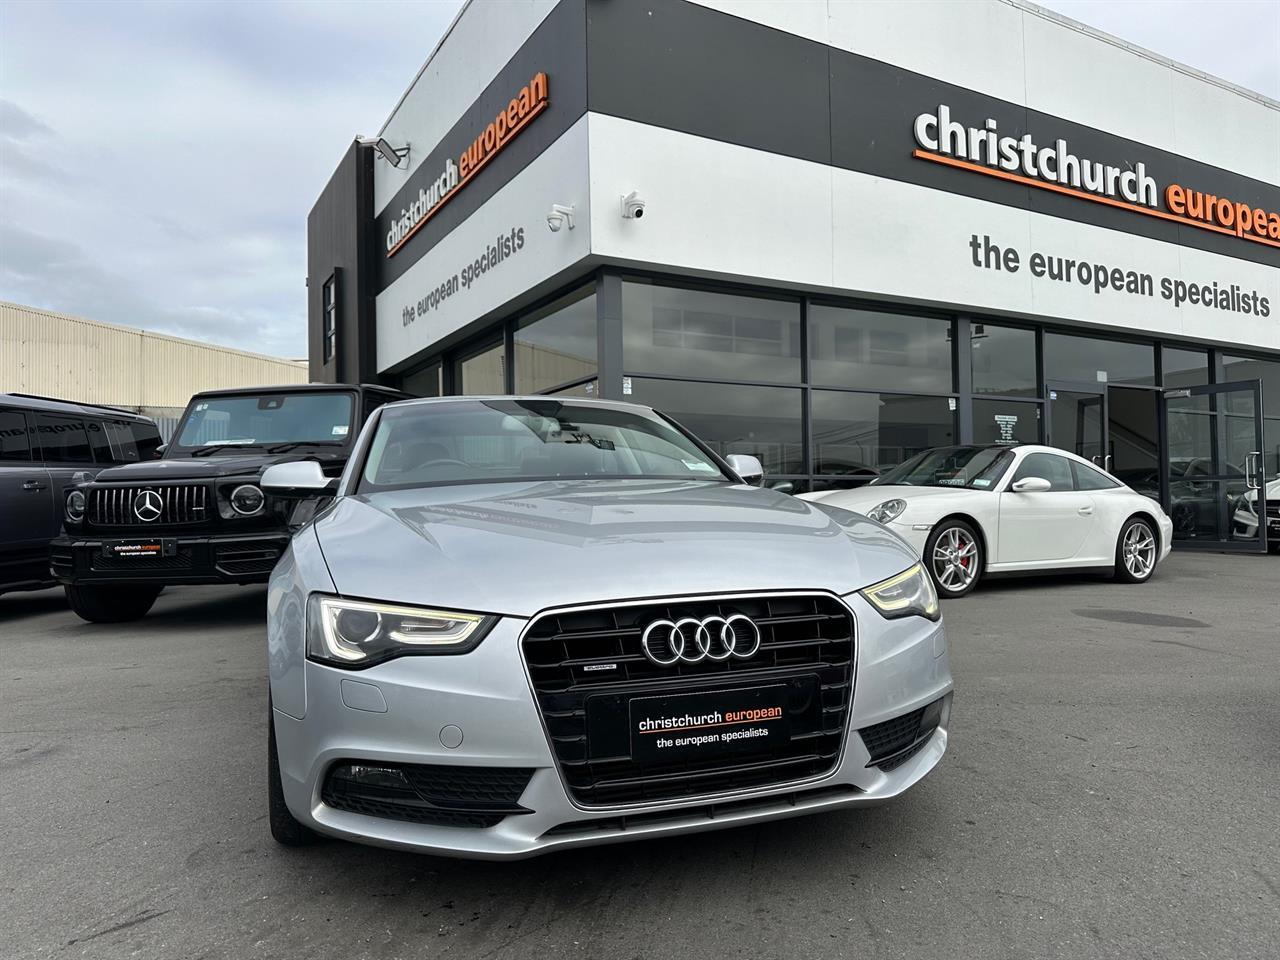 image-1, 2012 Audi A5 2.0 TFSI Quattro Facelift Coupe at Christchurch